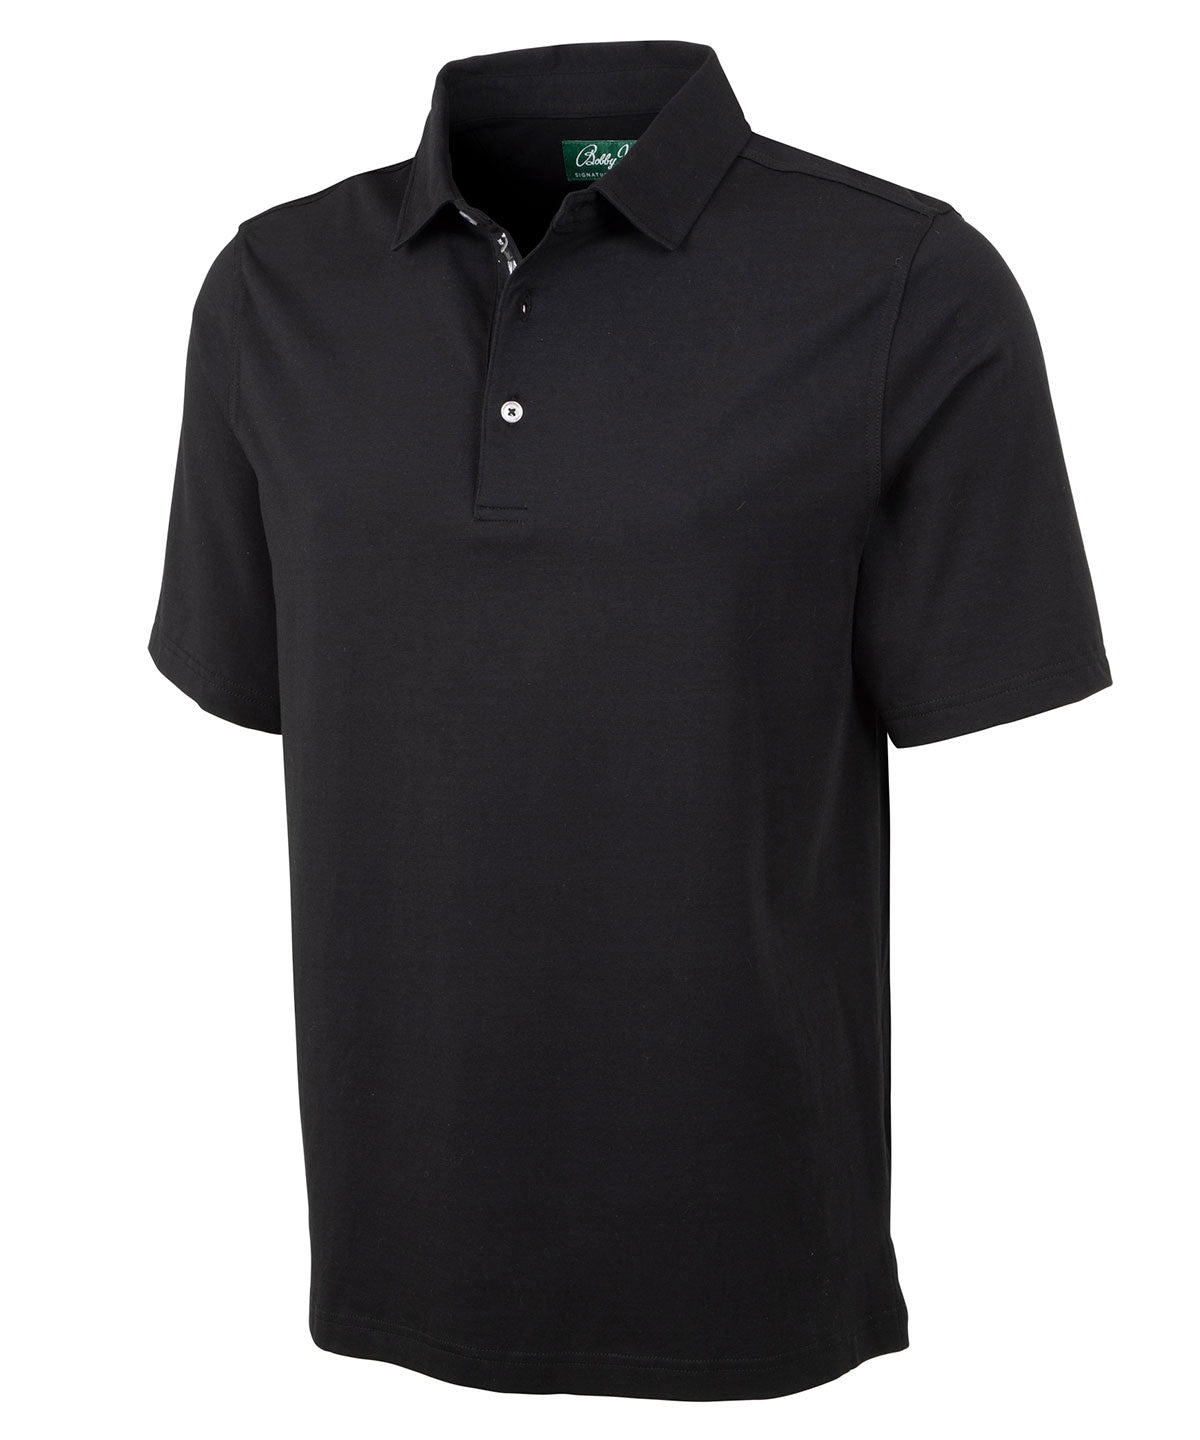 Signature 100% Mercerized Cotton Solid Polo Shirt with Tipping - Bobby Jones